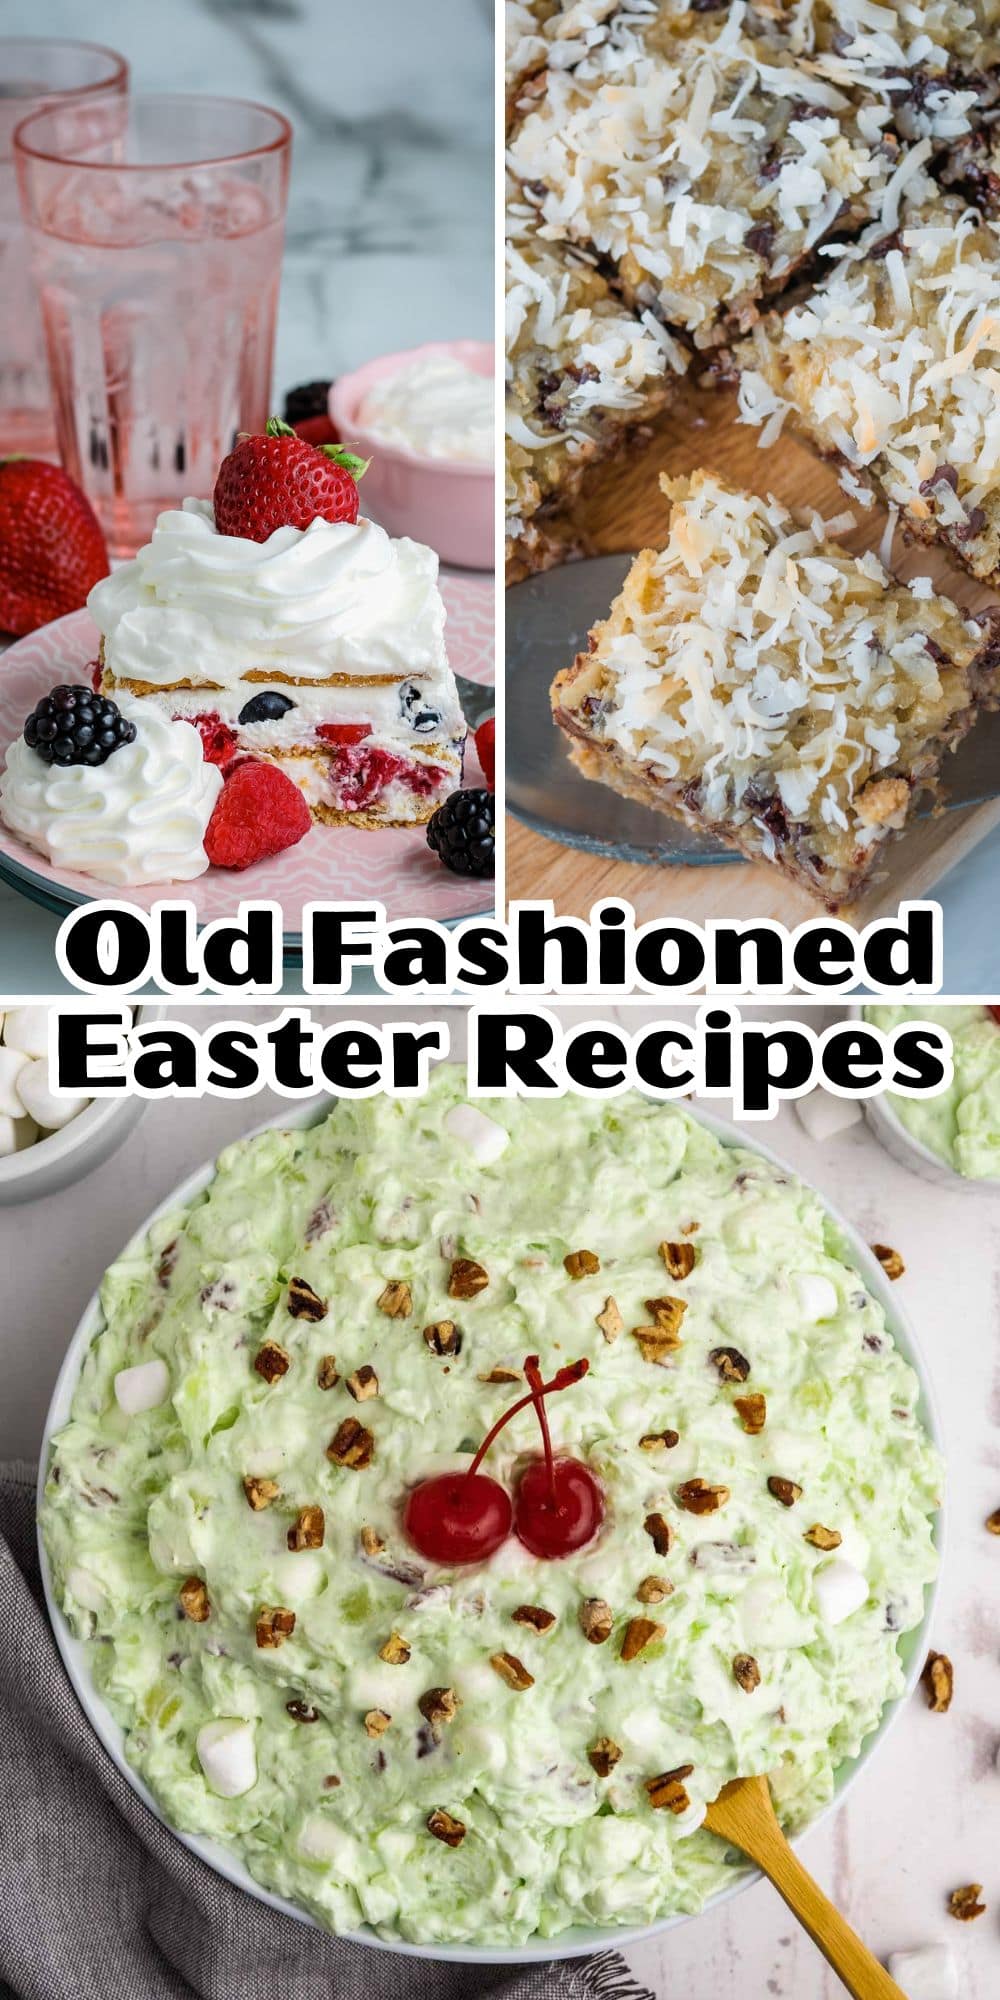 A collage of three easter dessert dishes featuring whipped cream-topped fruit jello, a coconut layered cake, and a green pistachio fluff salad, titled "old fashioned easter recipes.